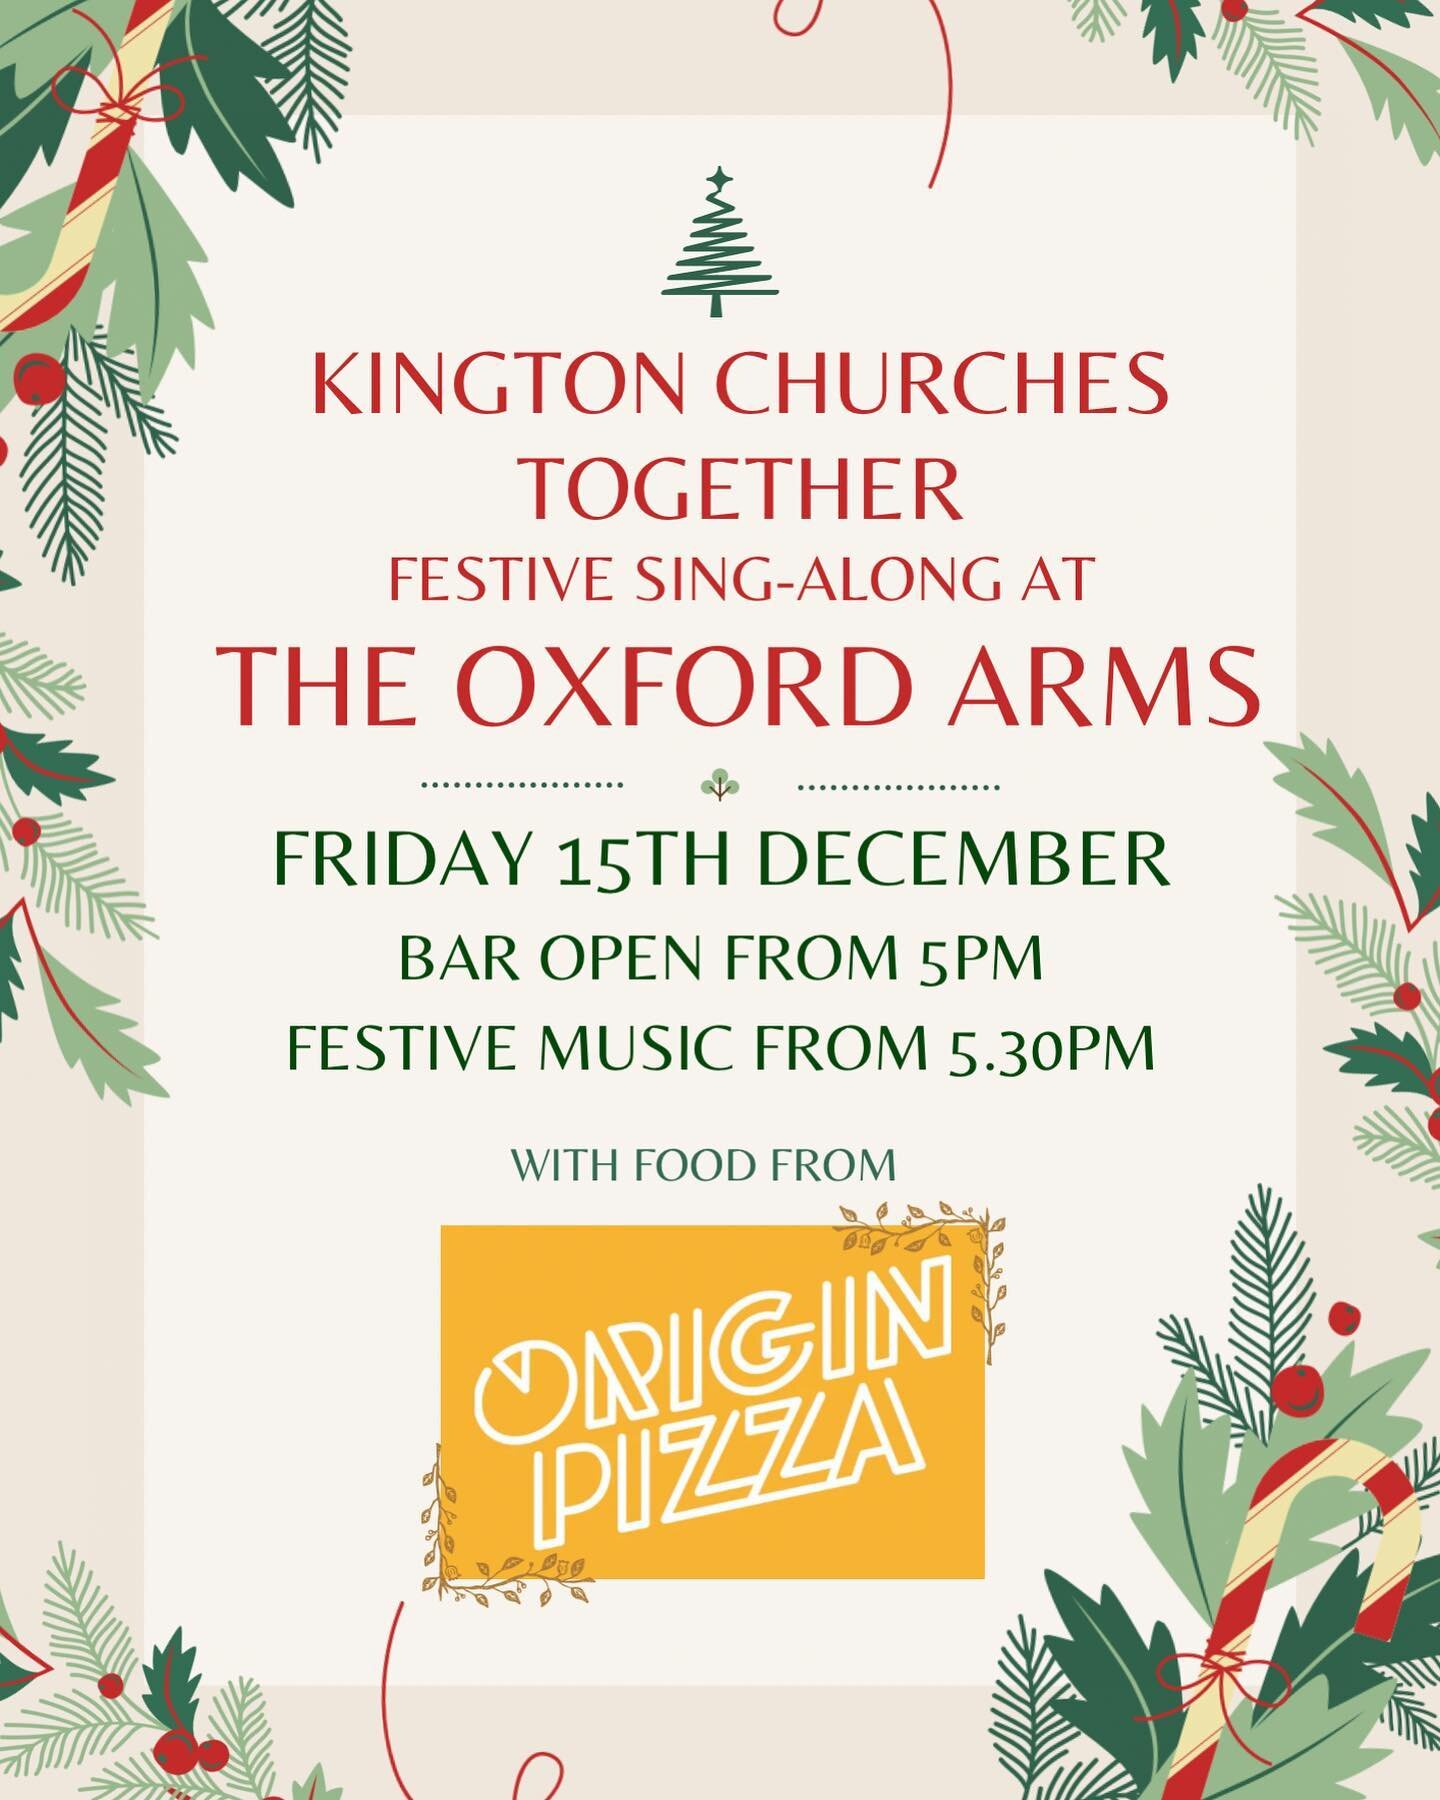 🍕To pre-order your pizza on Friday click this link! 🍕
https://pay.yoello.com/v/originpizza-popup

#openarmskington #communityhub #communitypub #popupkitchen #supportlocal #welovekington #herefordshire #kingtonherefordshire #ruralherefordshire #rura